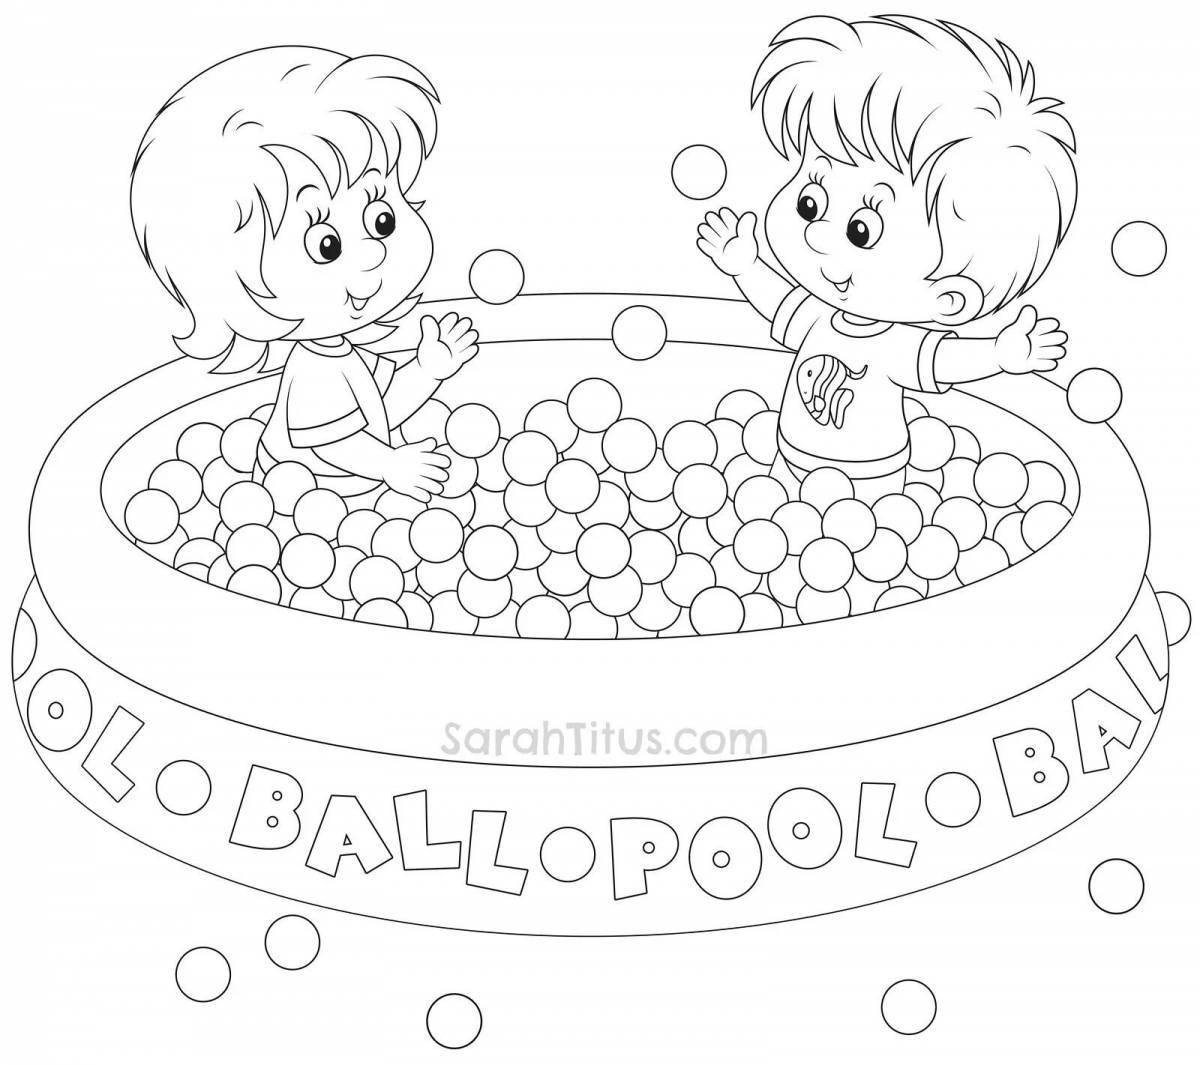 Playful swimming pool coloring page for kids